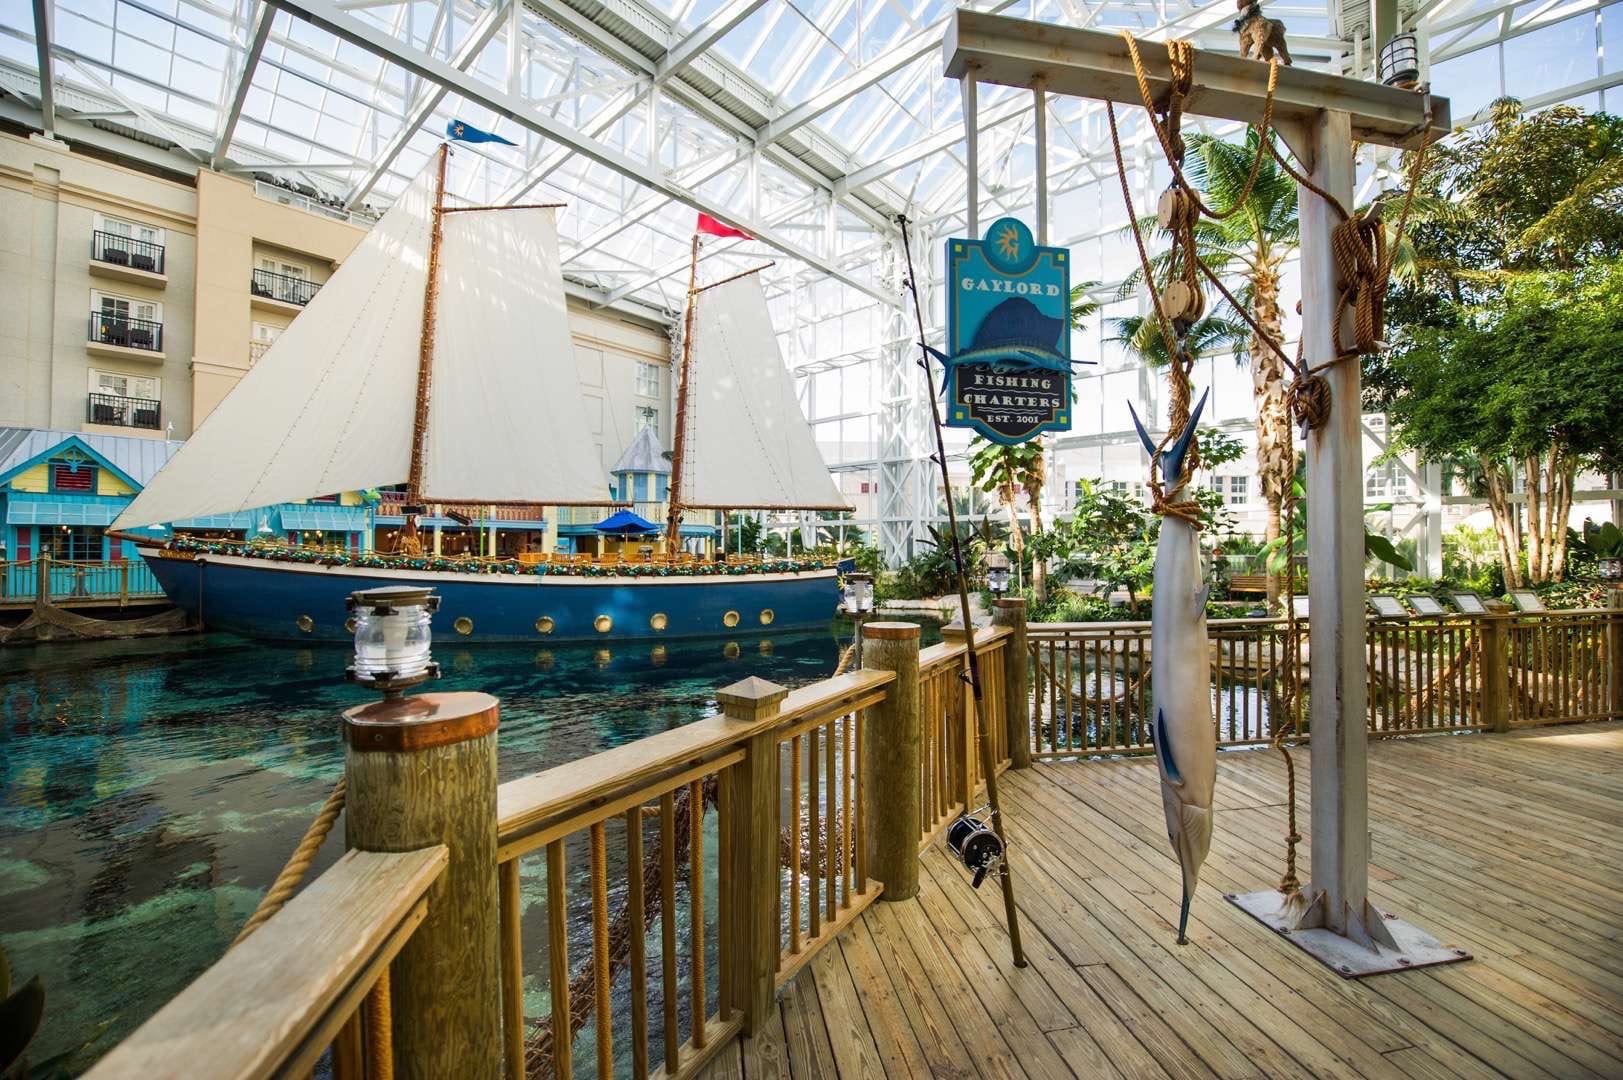 Gaylord Palms Resort and Convention Center Interior showing a marine themed area with a small ship, fishing rod and replica of hanging marlin fish.